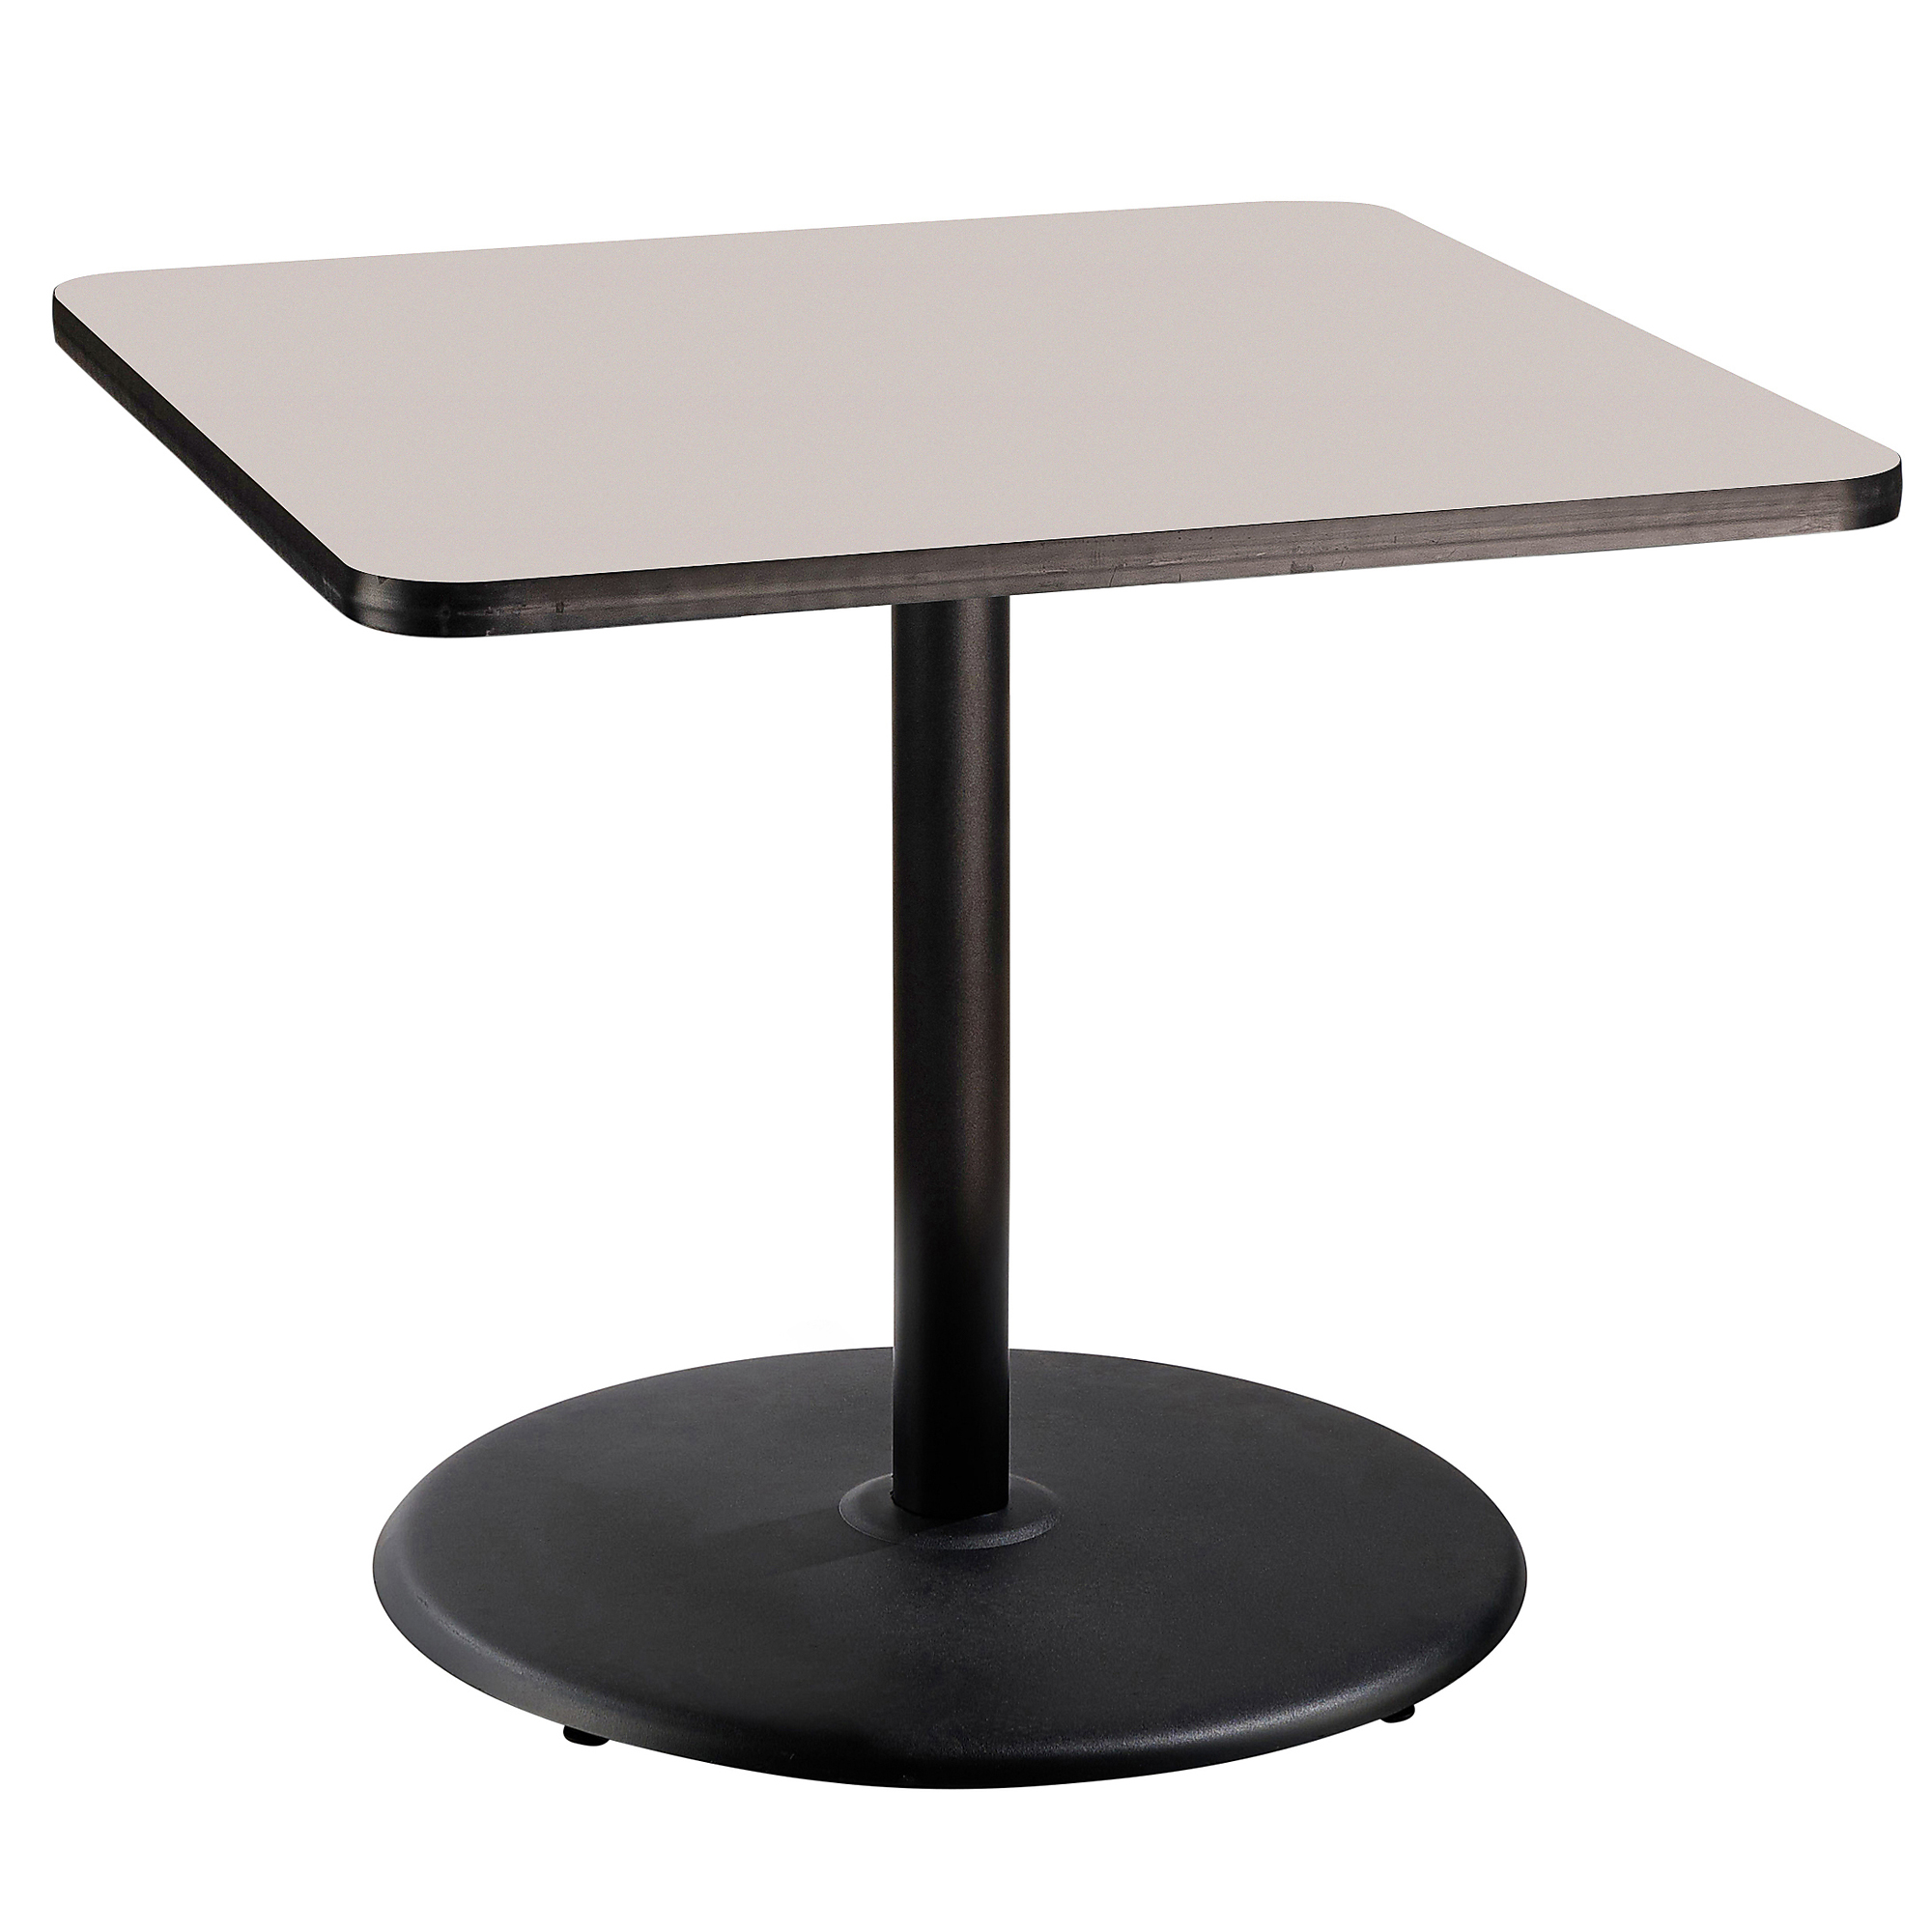 "National Public Seating, Cafe Table, 36x36x30 Square ""R"" Base, Height 30 in, Model CT33636RDPBTMGY"